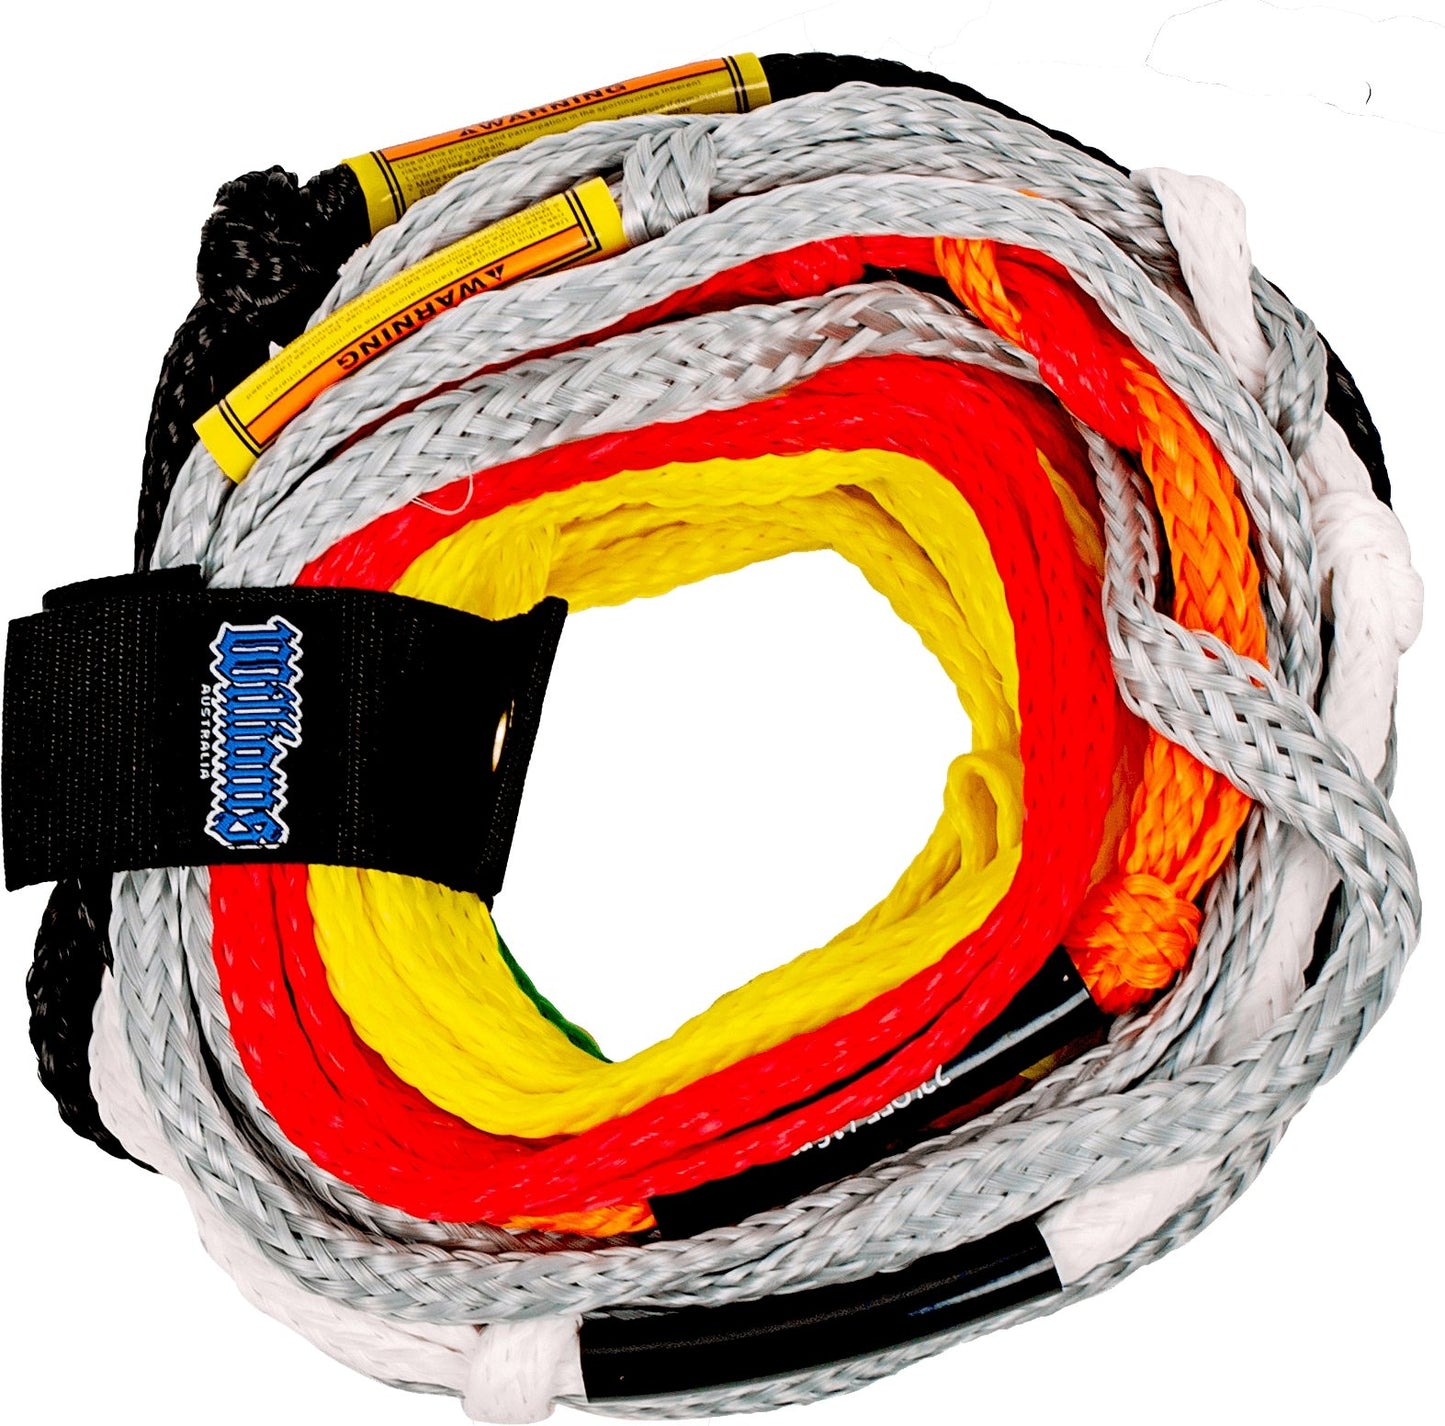 21.5M 11 LOOP ROPE ONLY - 80 STRAND -Williams205602--